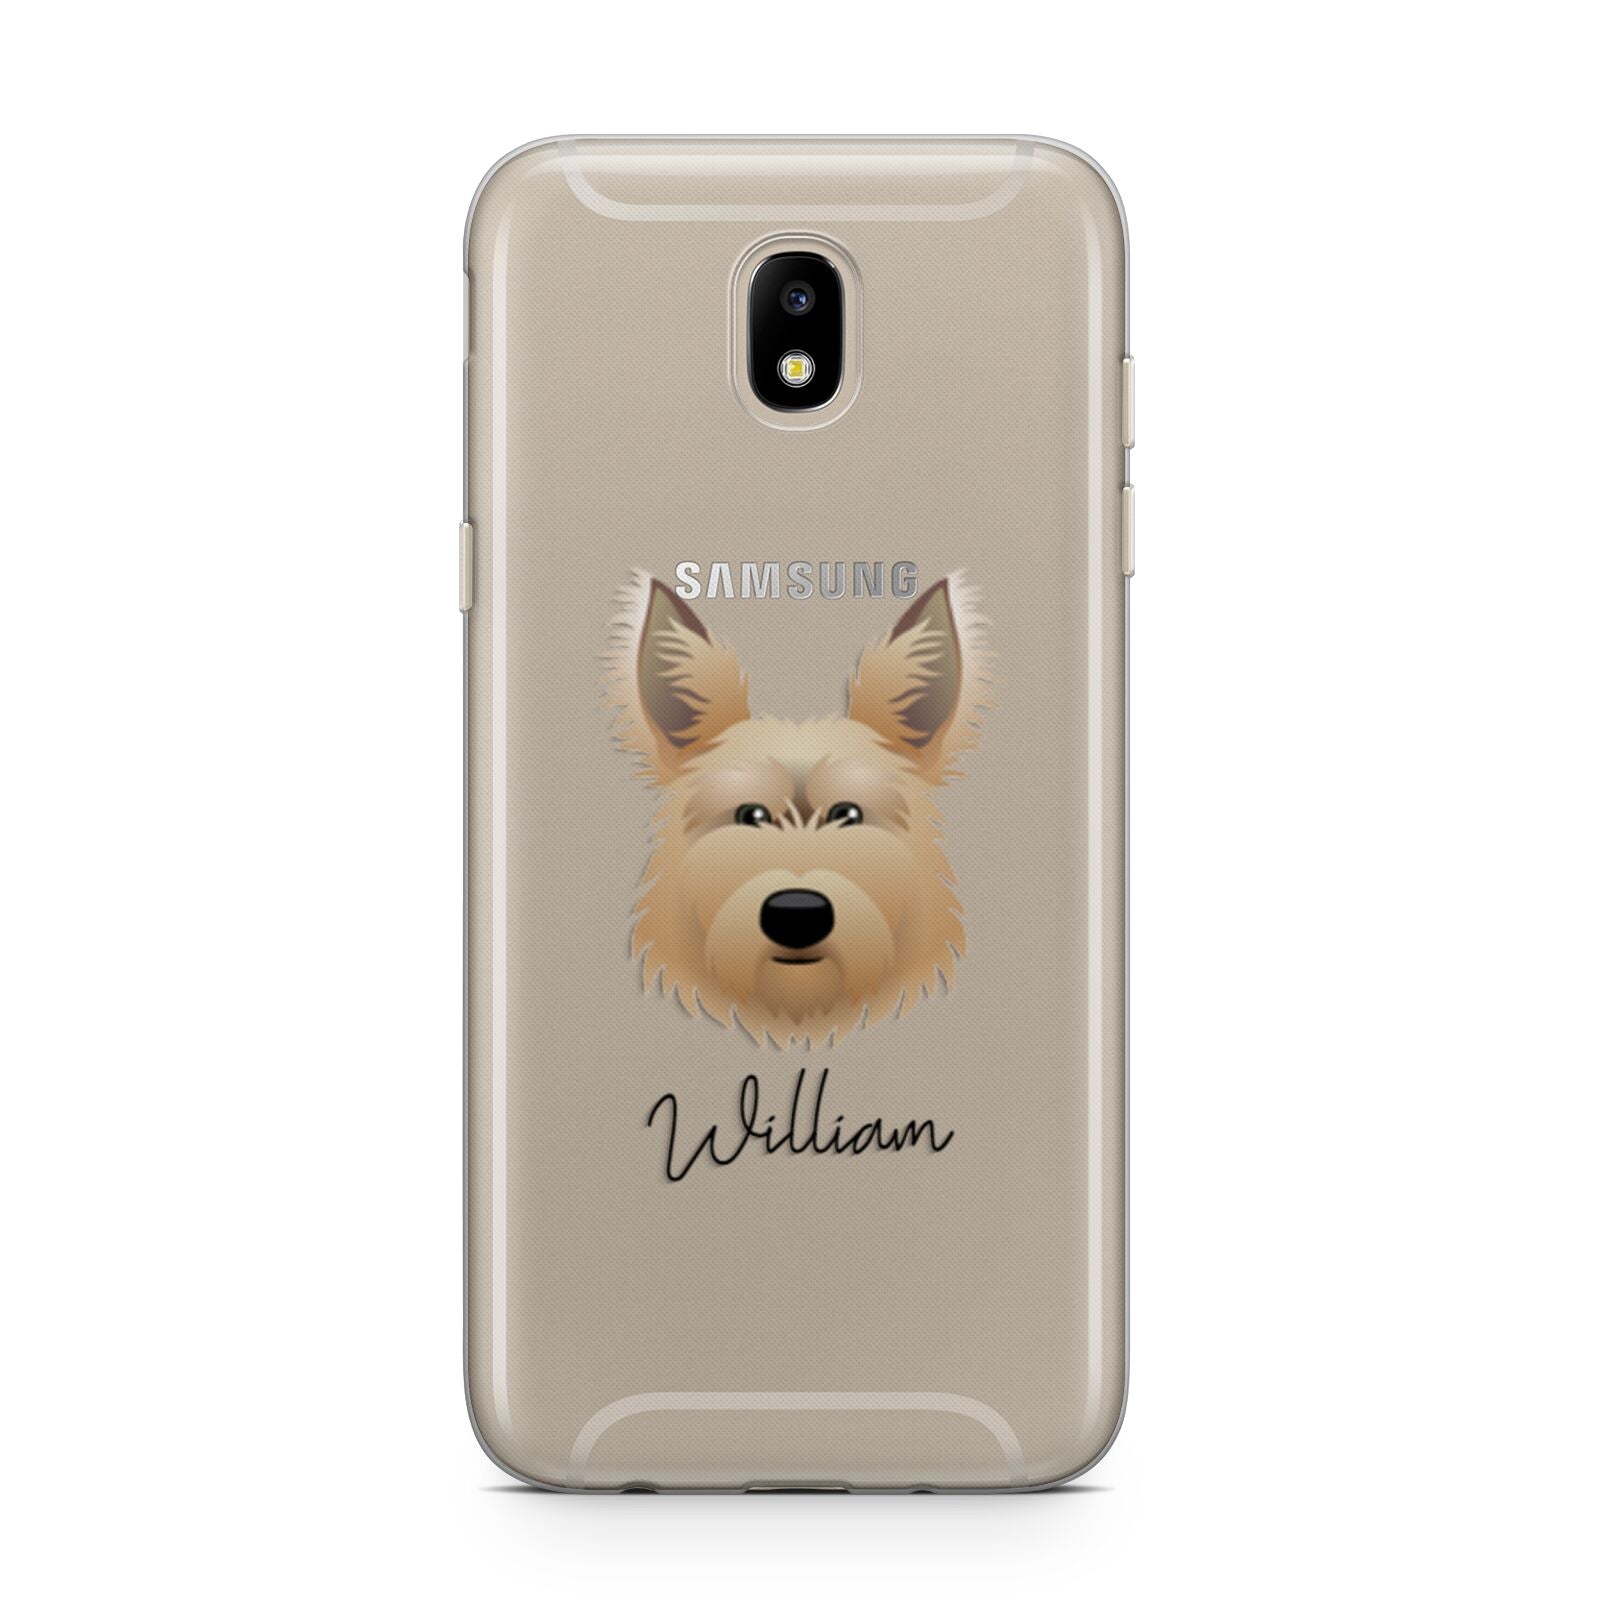 Picardy Sheepdog Personalised Samsung J5 2017 Case